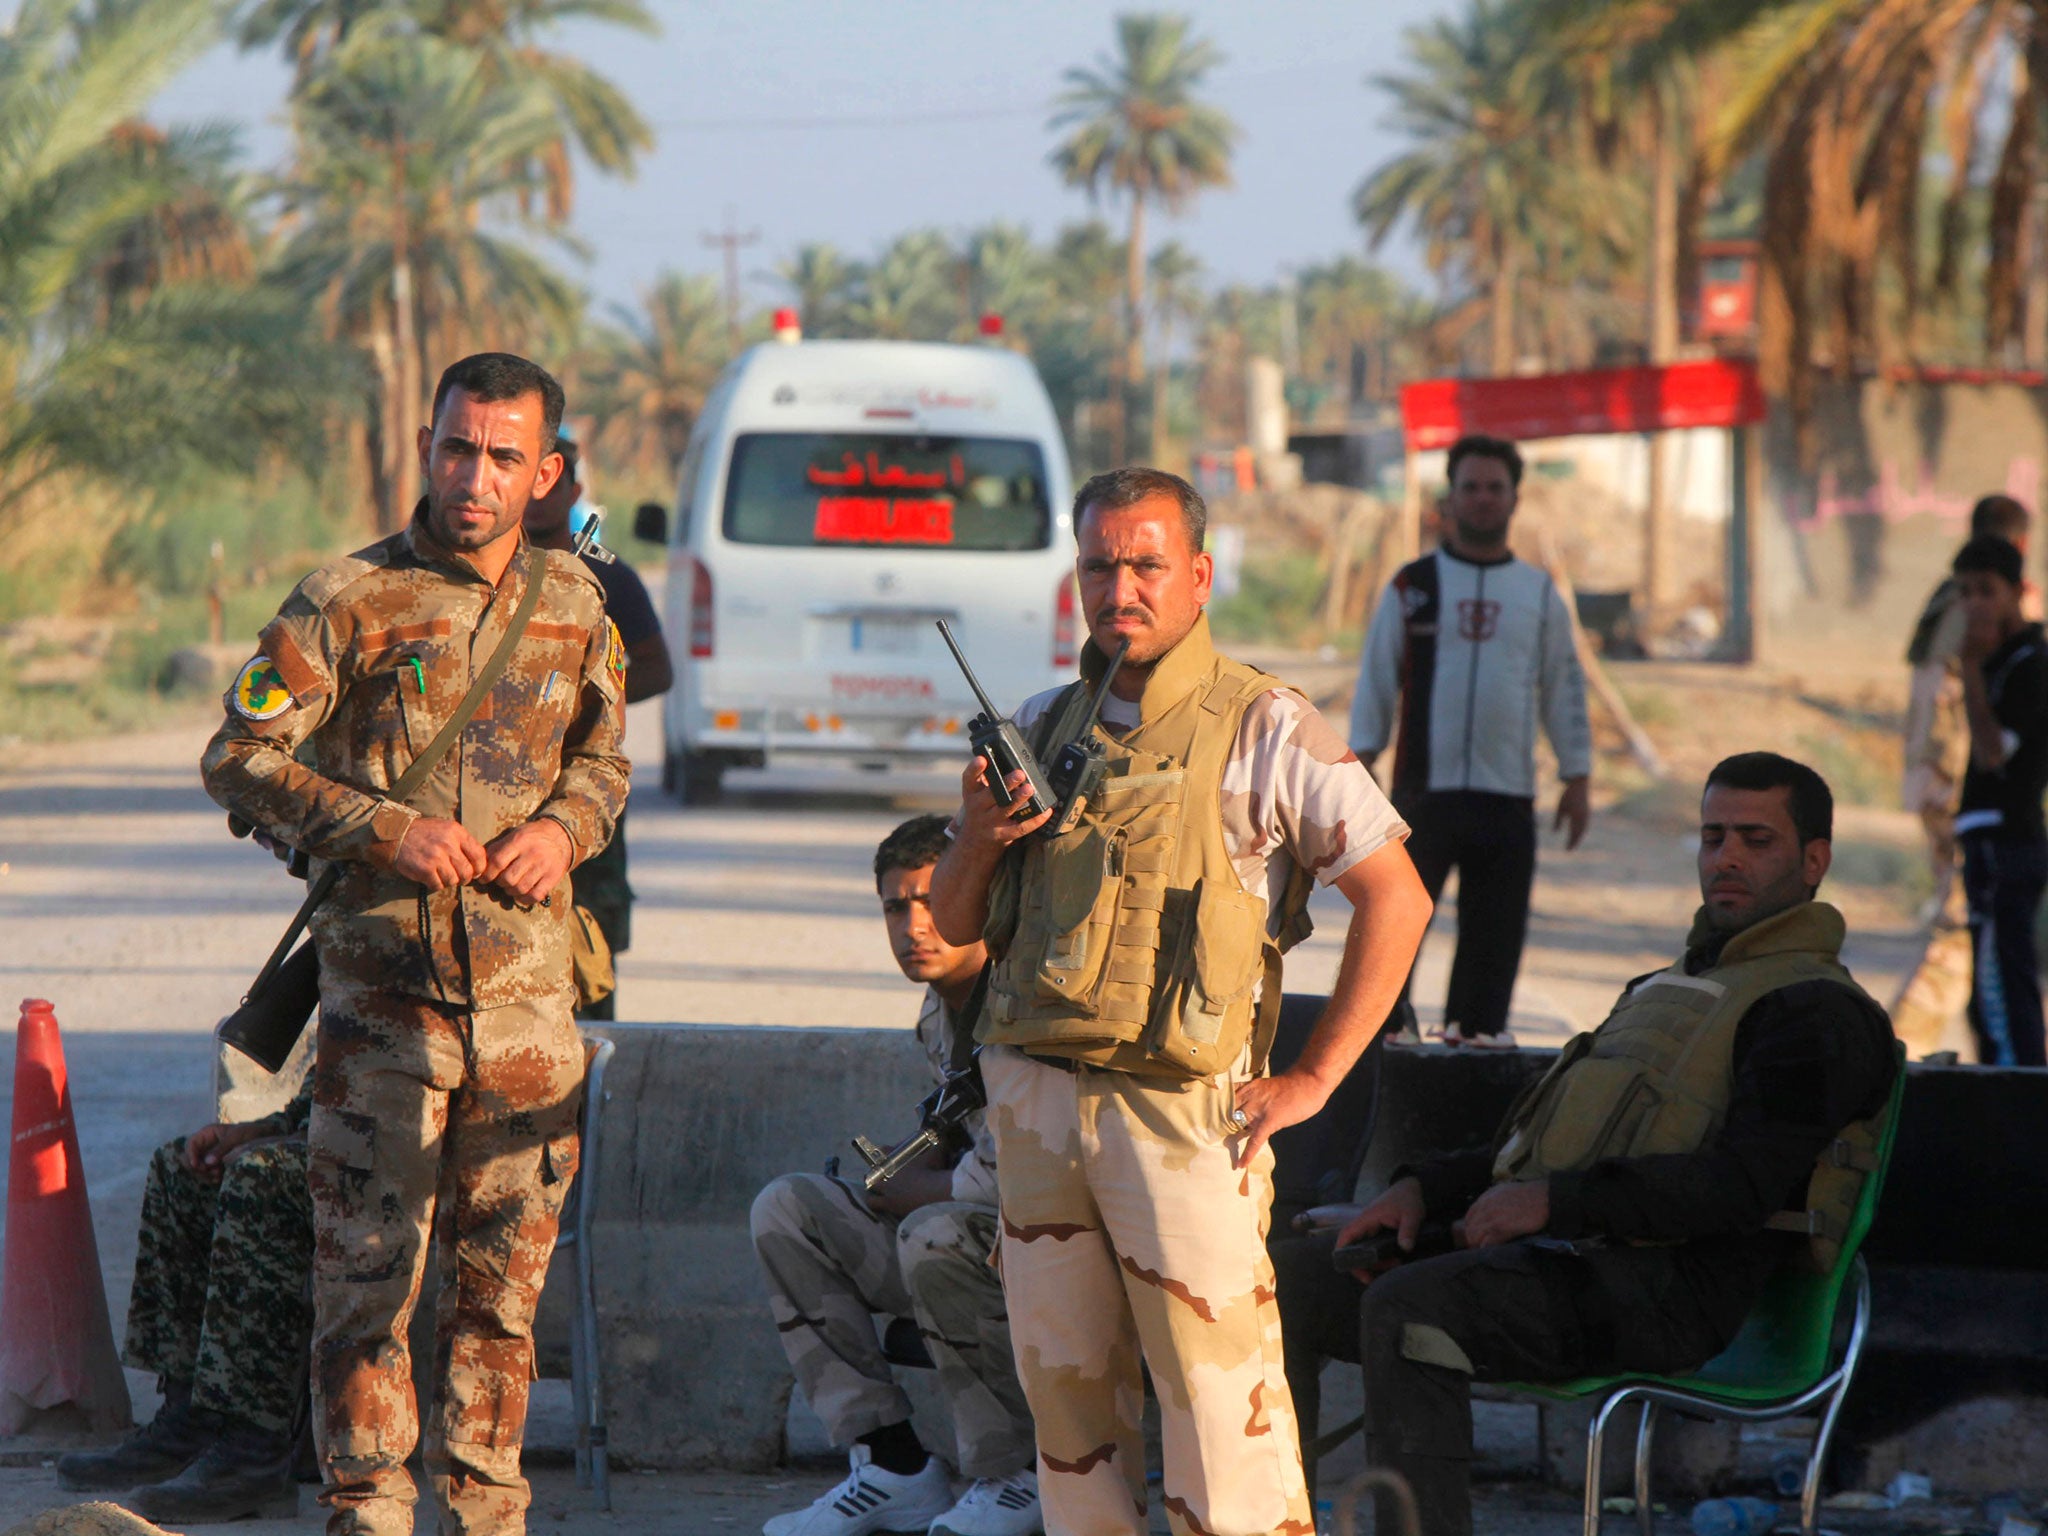 The Iraqi Army was rebuilt after the 2003 Iraq invasion, leading many disaffected commanders to flee